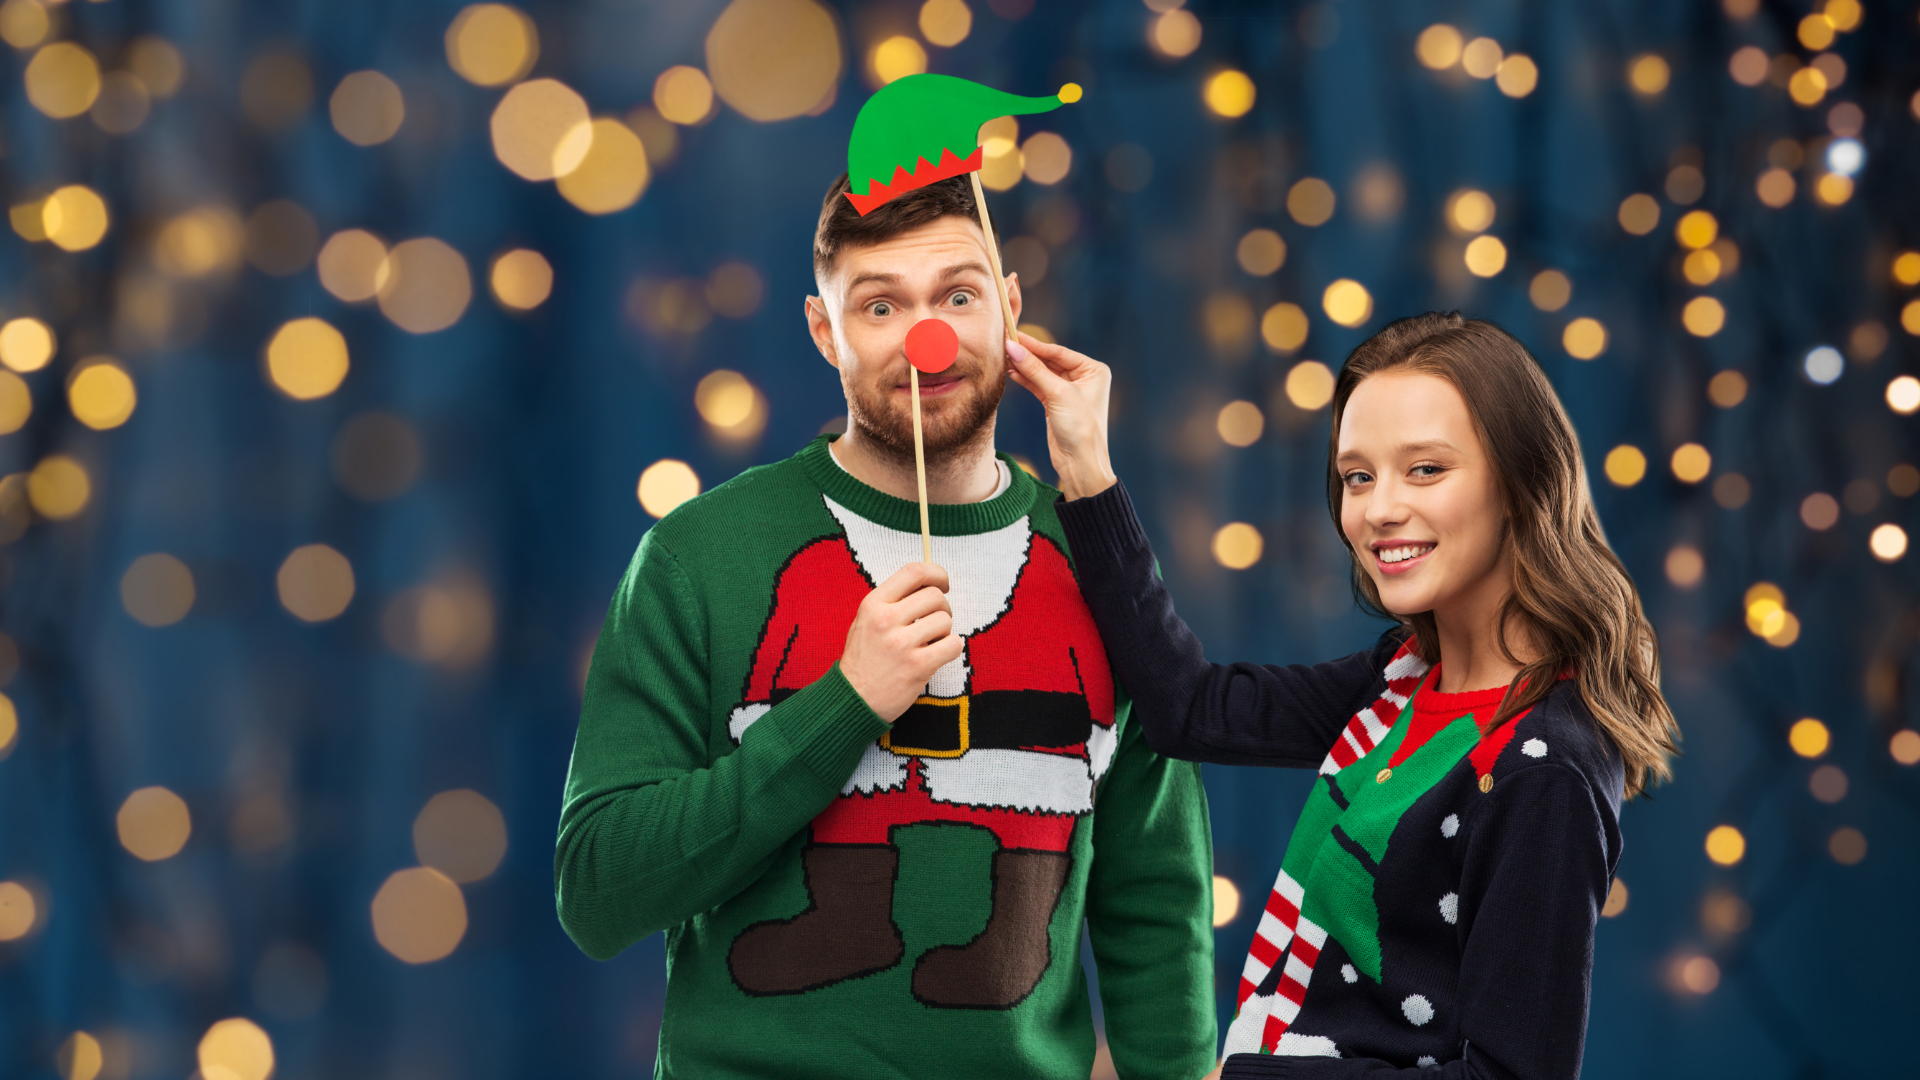 Must-Try Activities for This Christmas with Your Partner